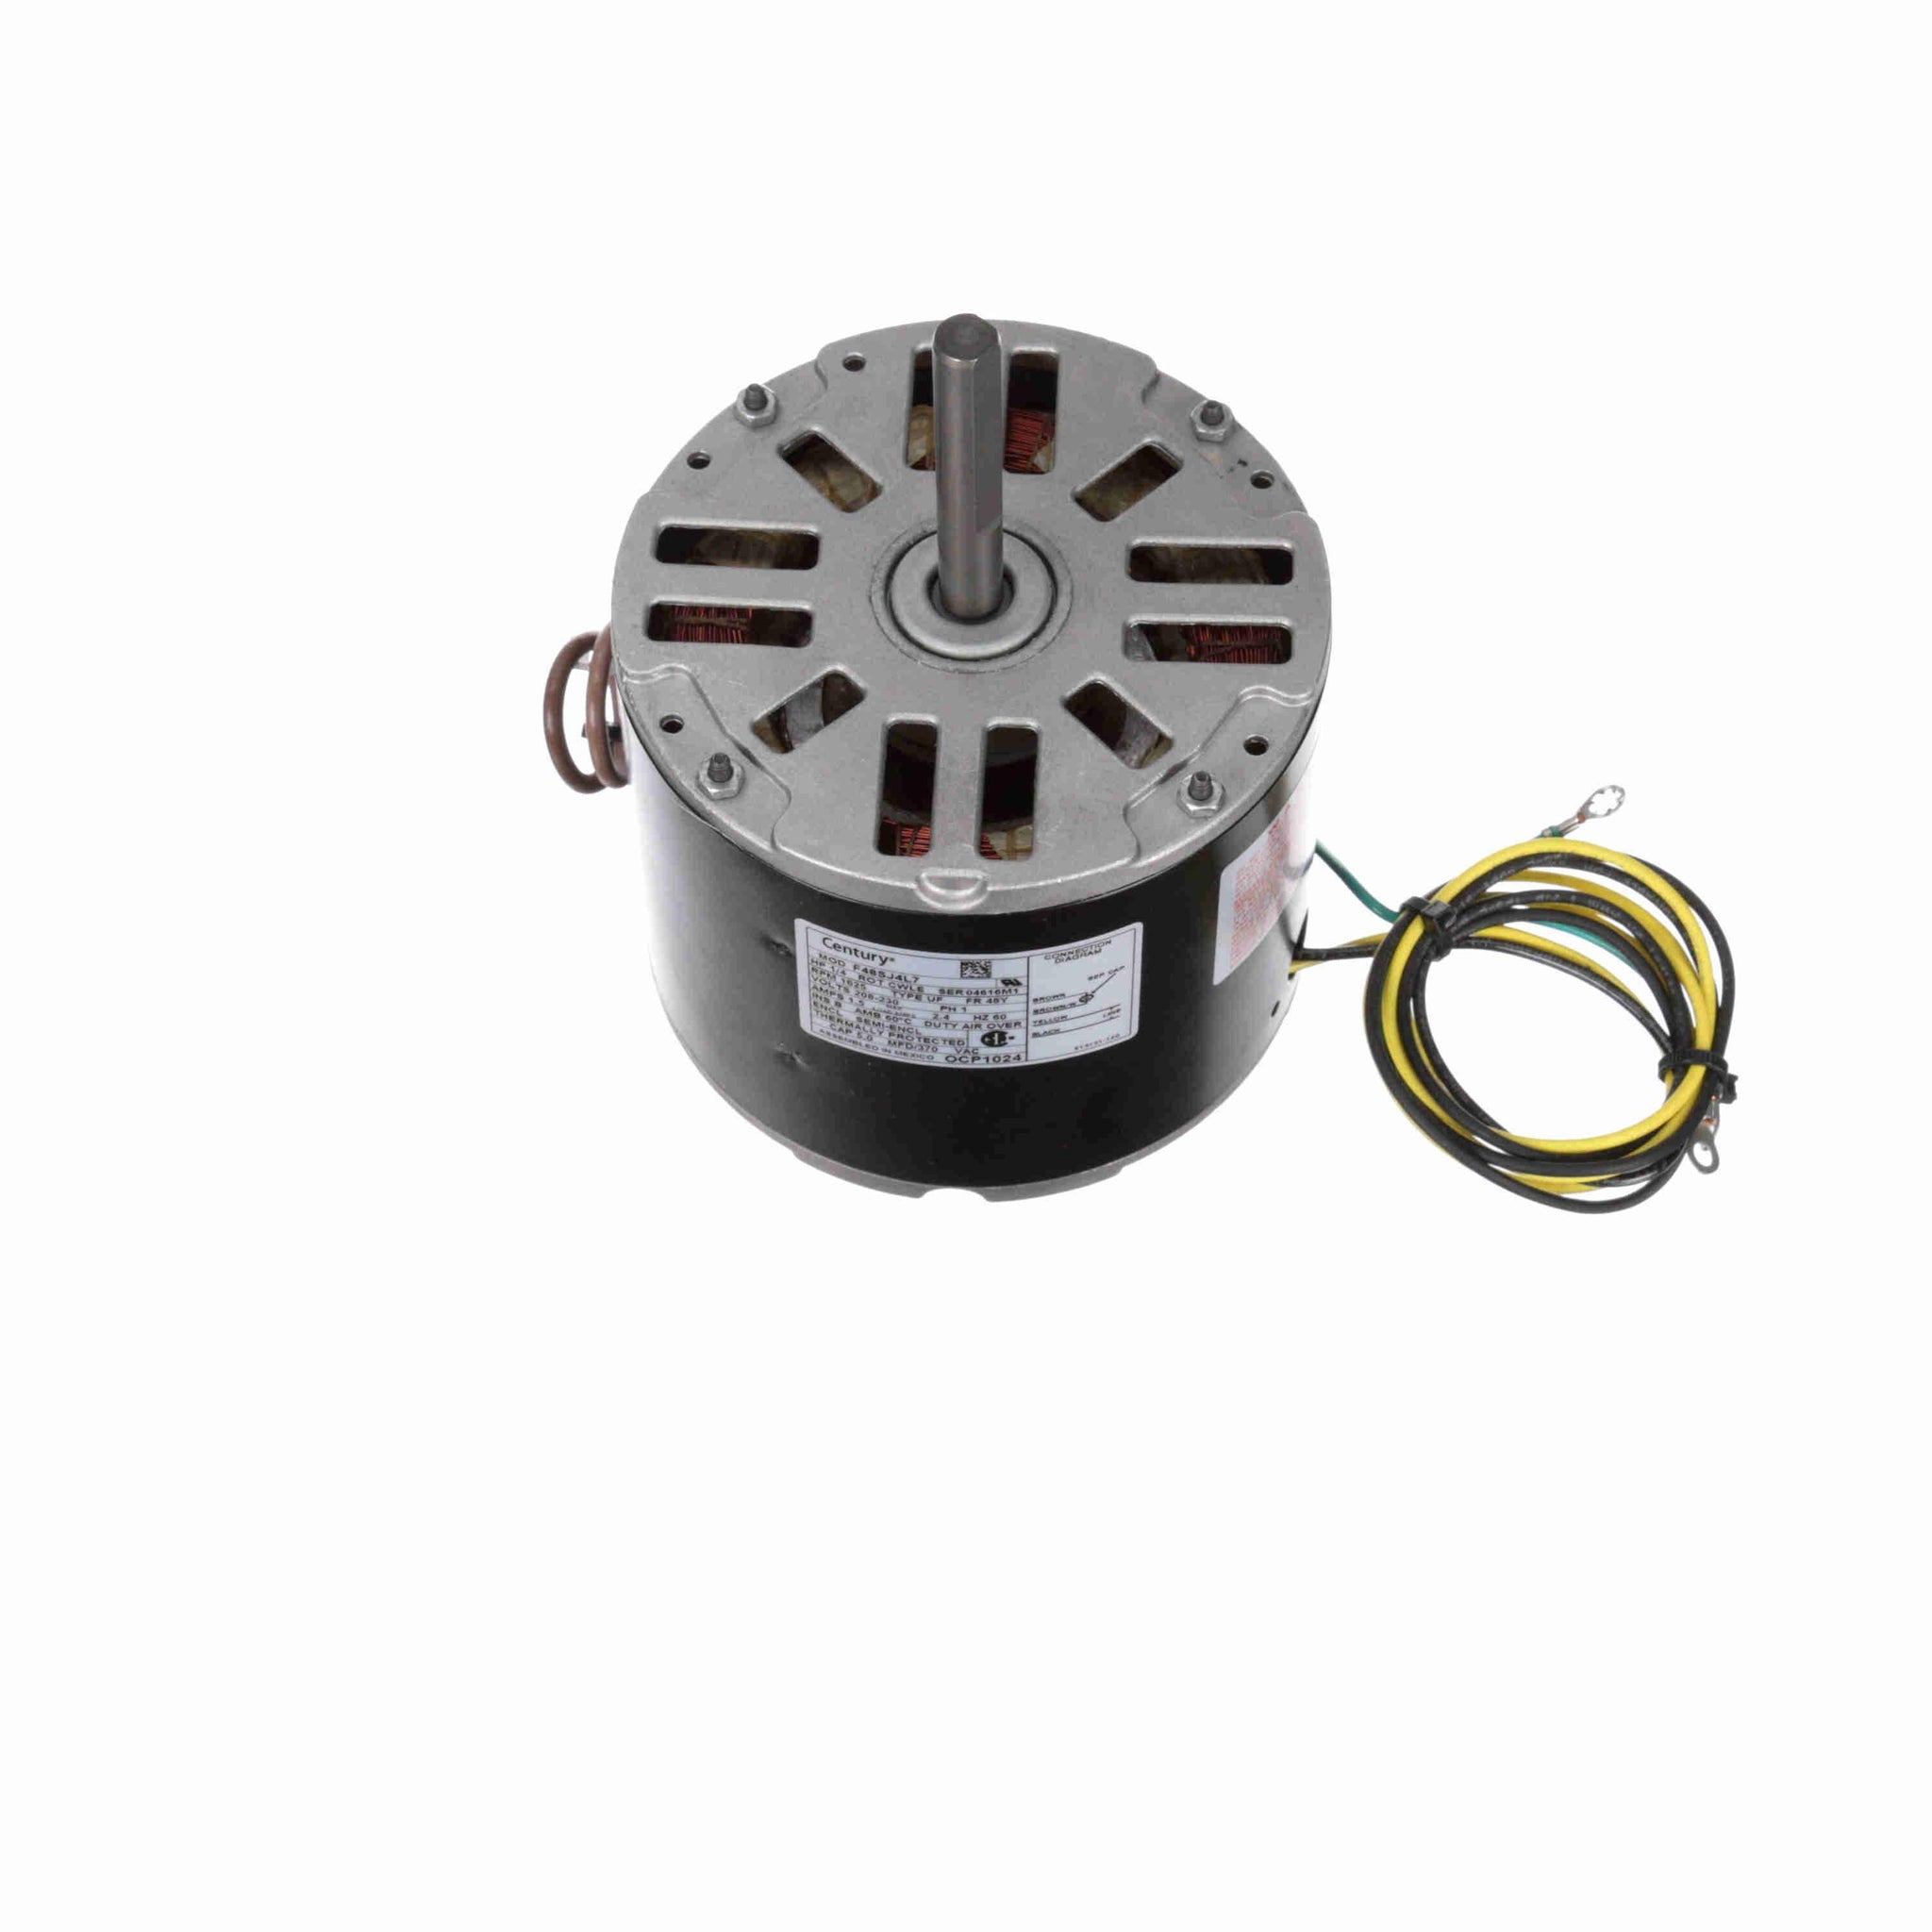 OCP1024 - 1/4 HP OEM Replacement Motor, 1625 RPM, 208-230 Volts, 48 Frame, OAO - Hardware & Moreee